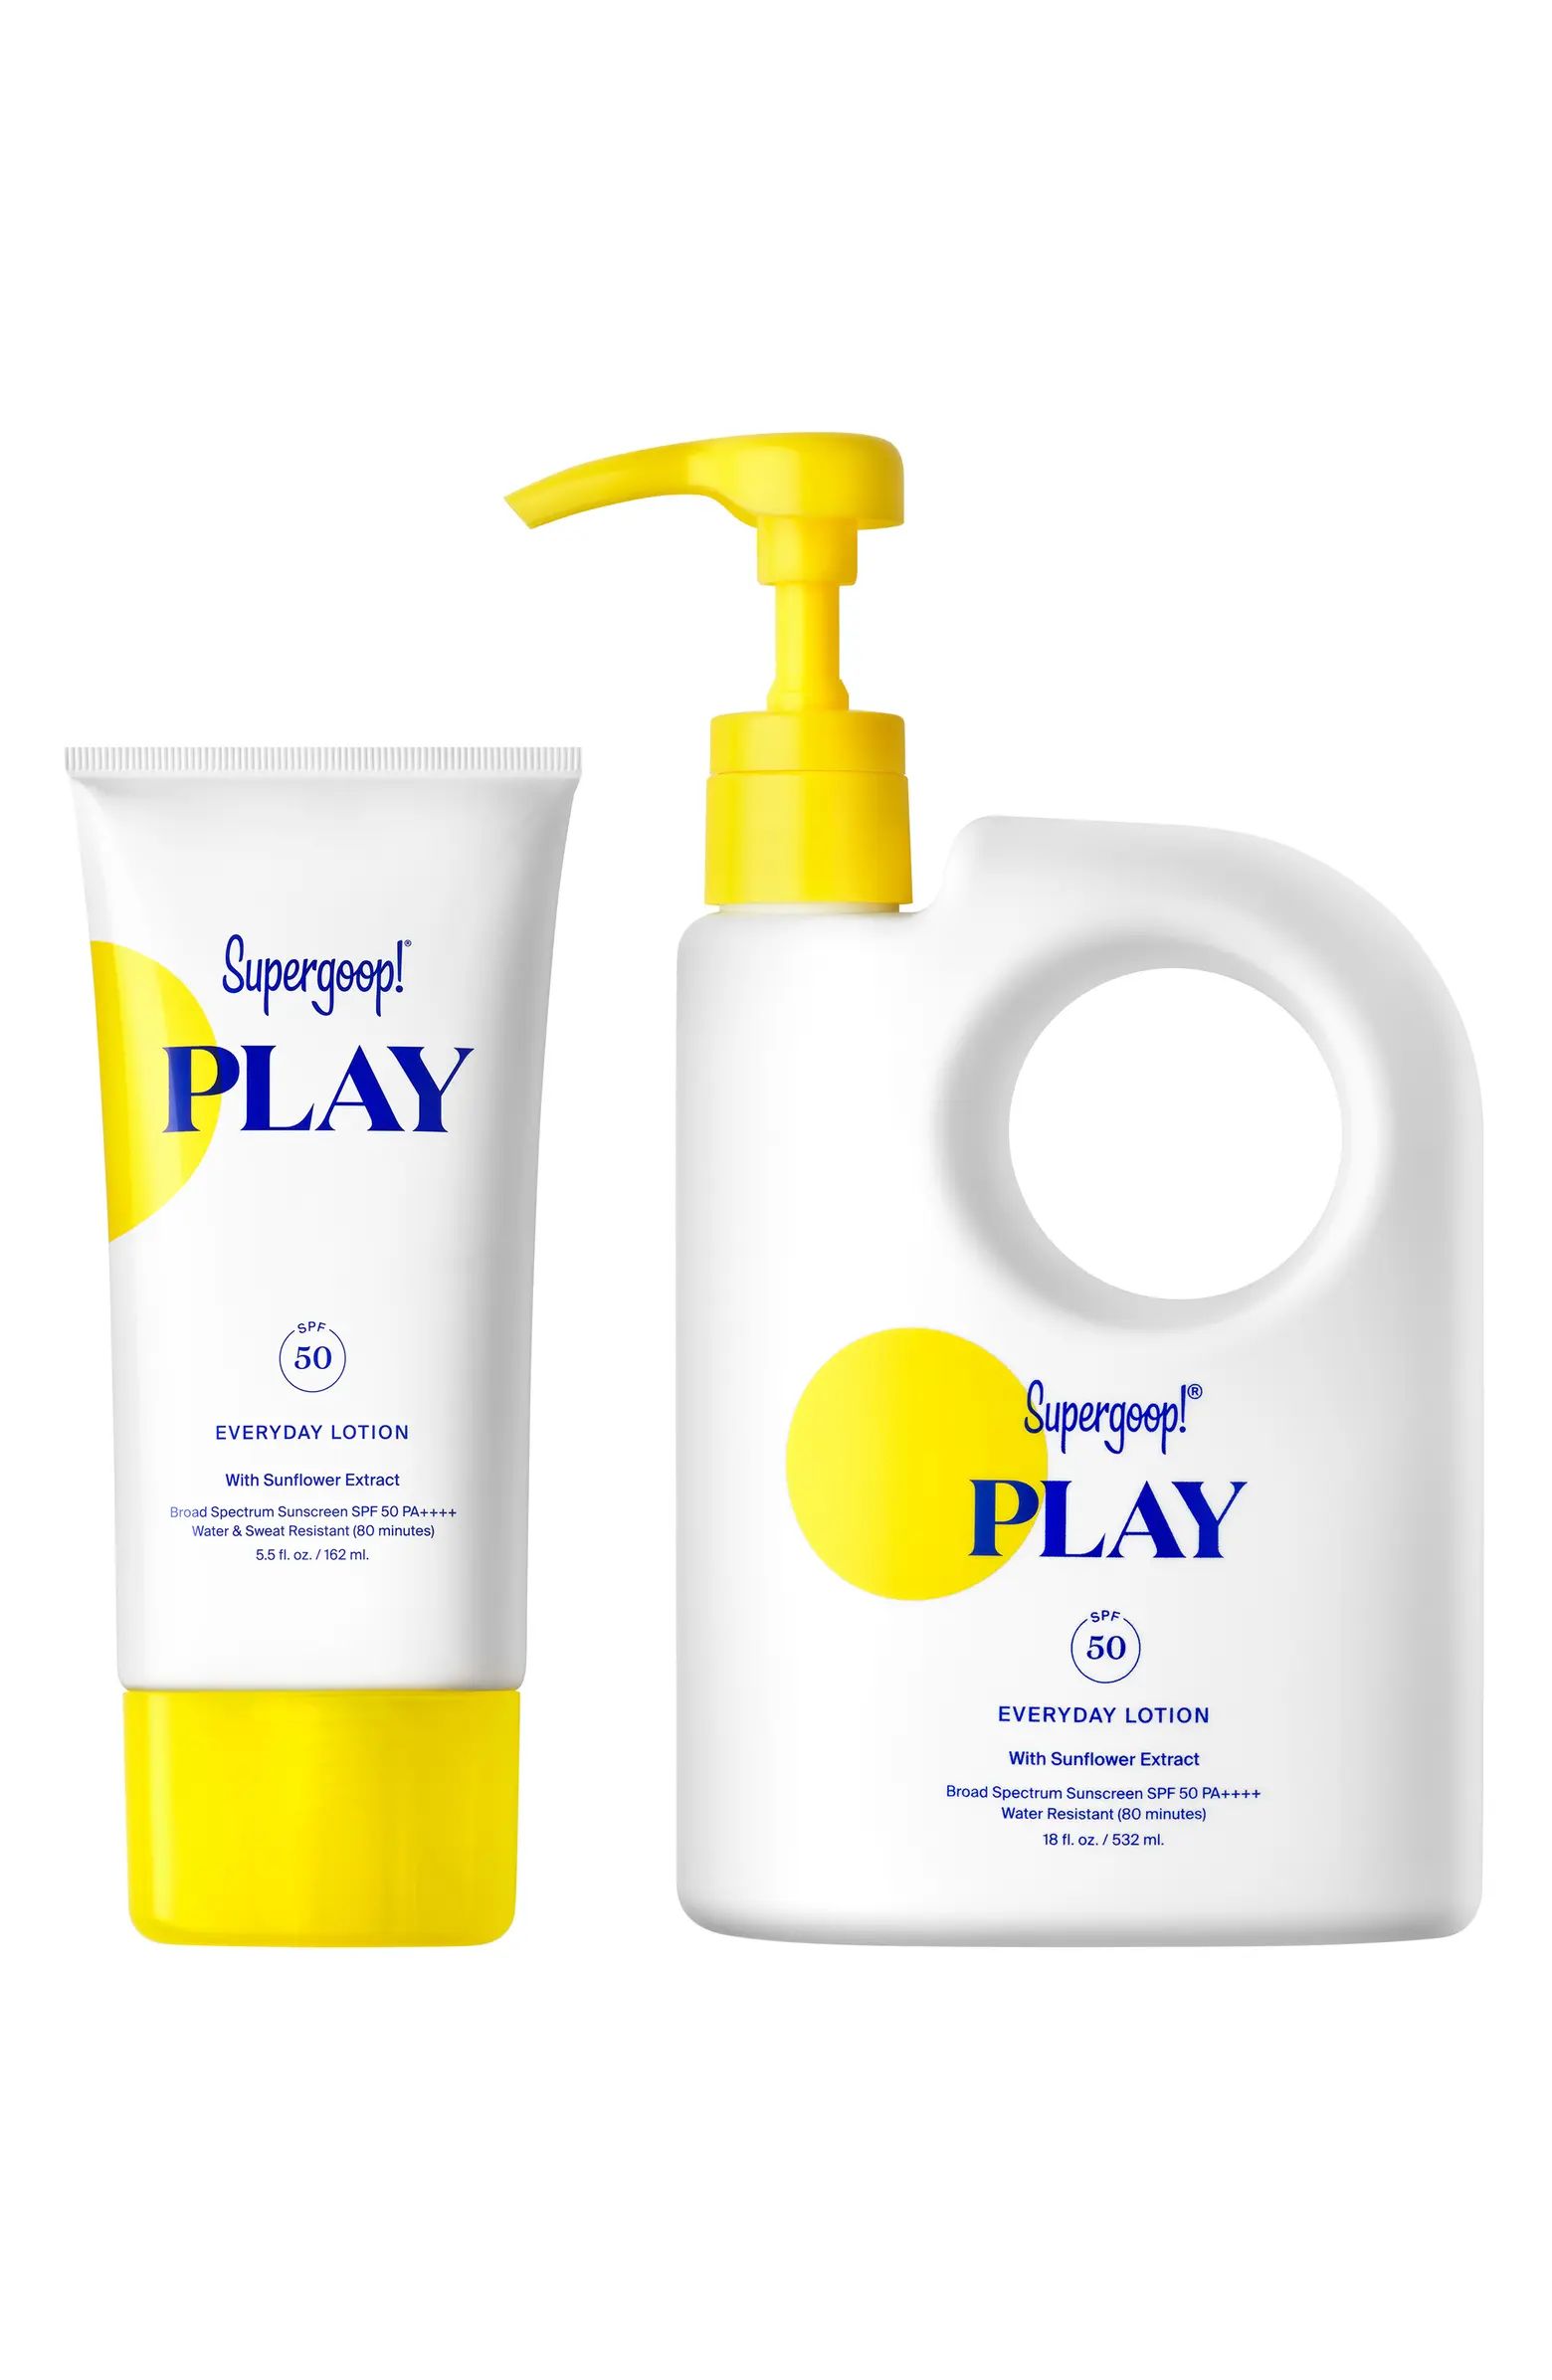 Play Everyday Lotion SPF 50 Home & Away Sunscreen Set $104 Value | Nordstrom